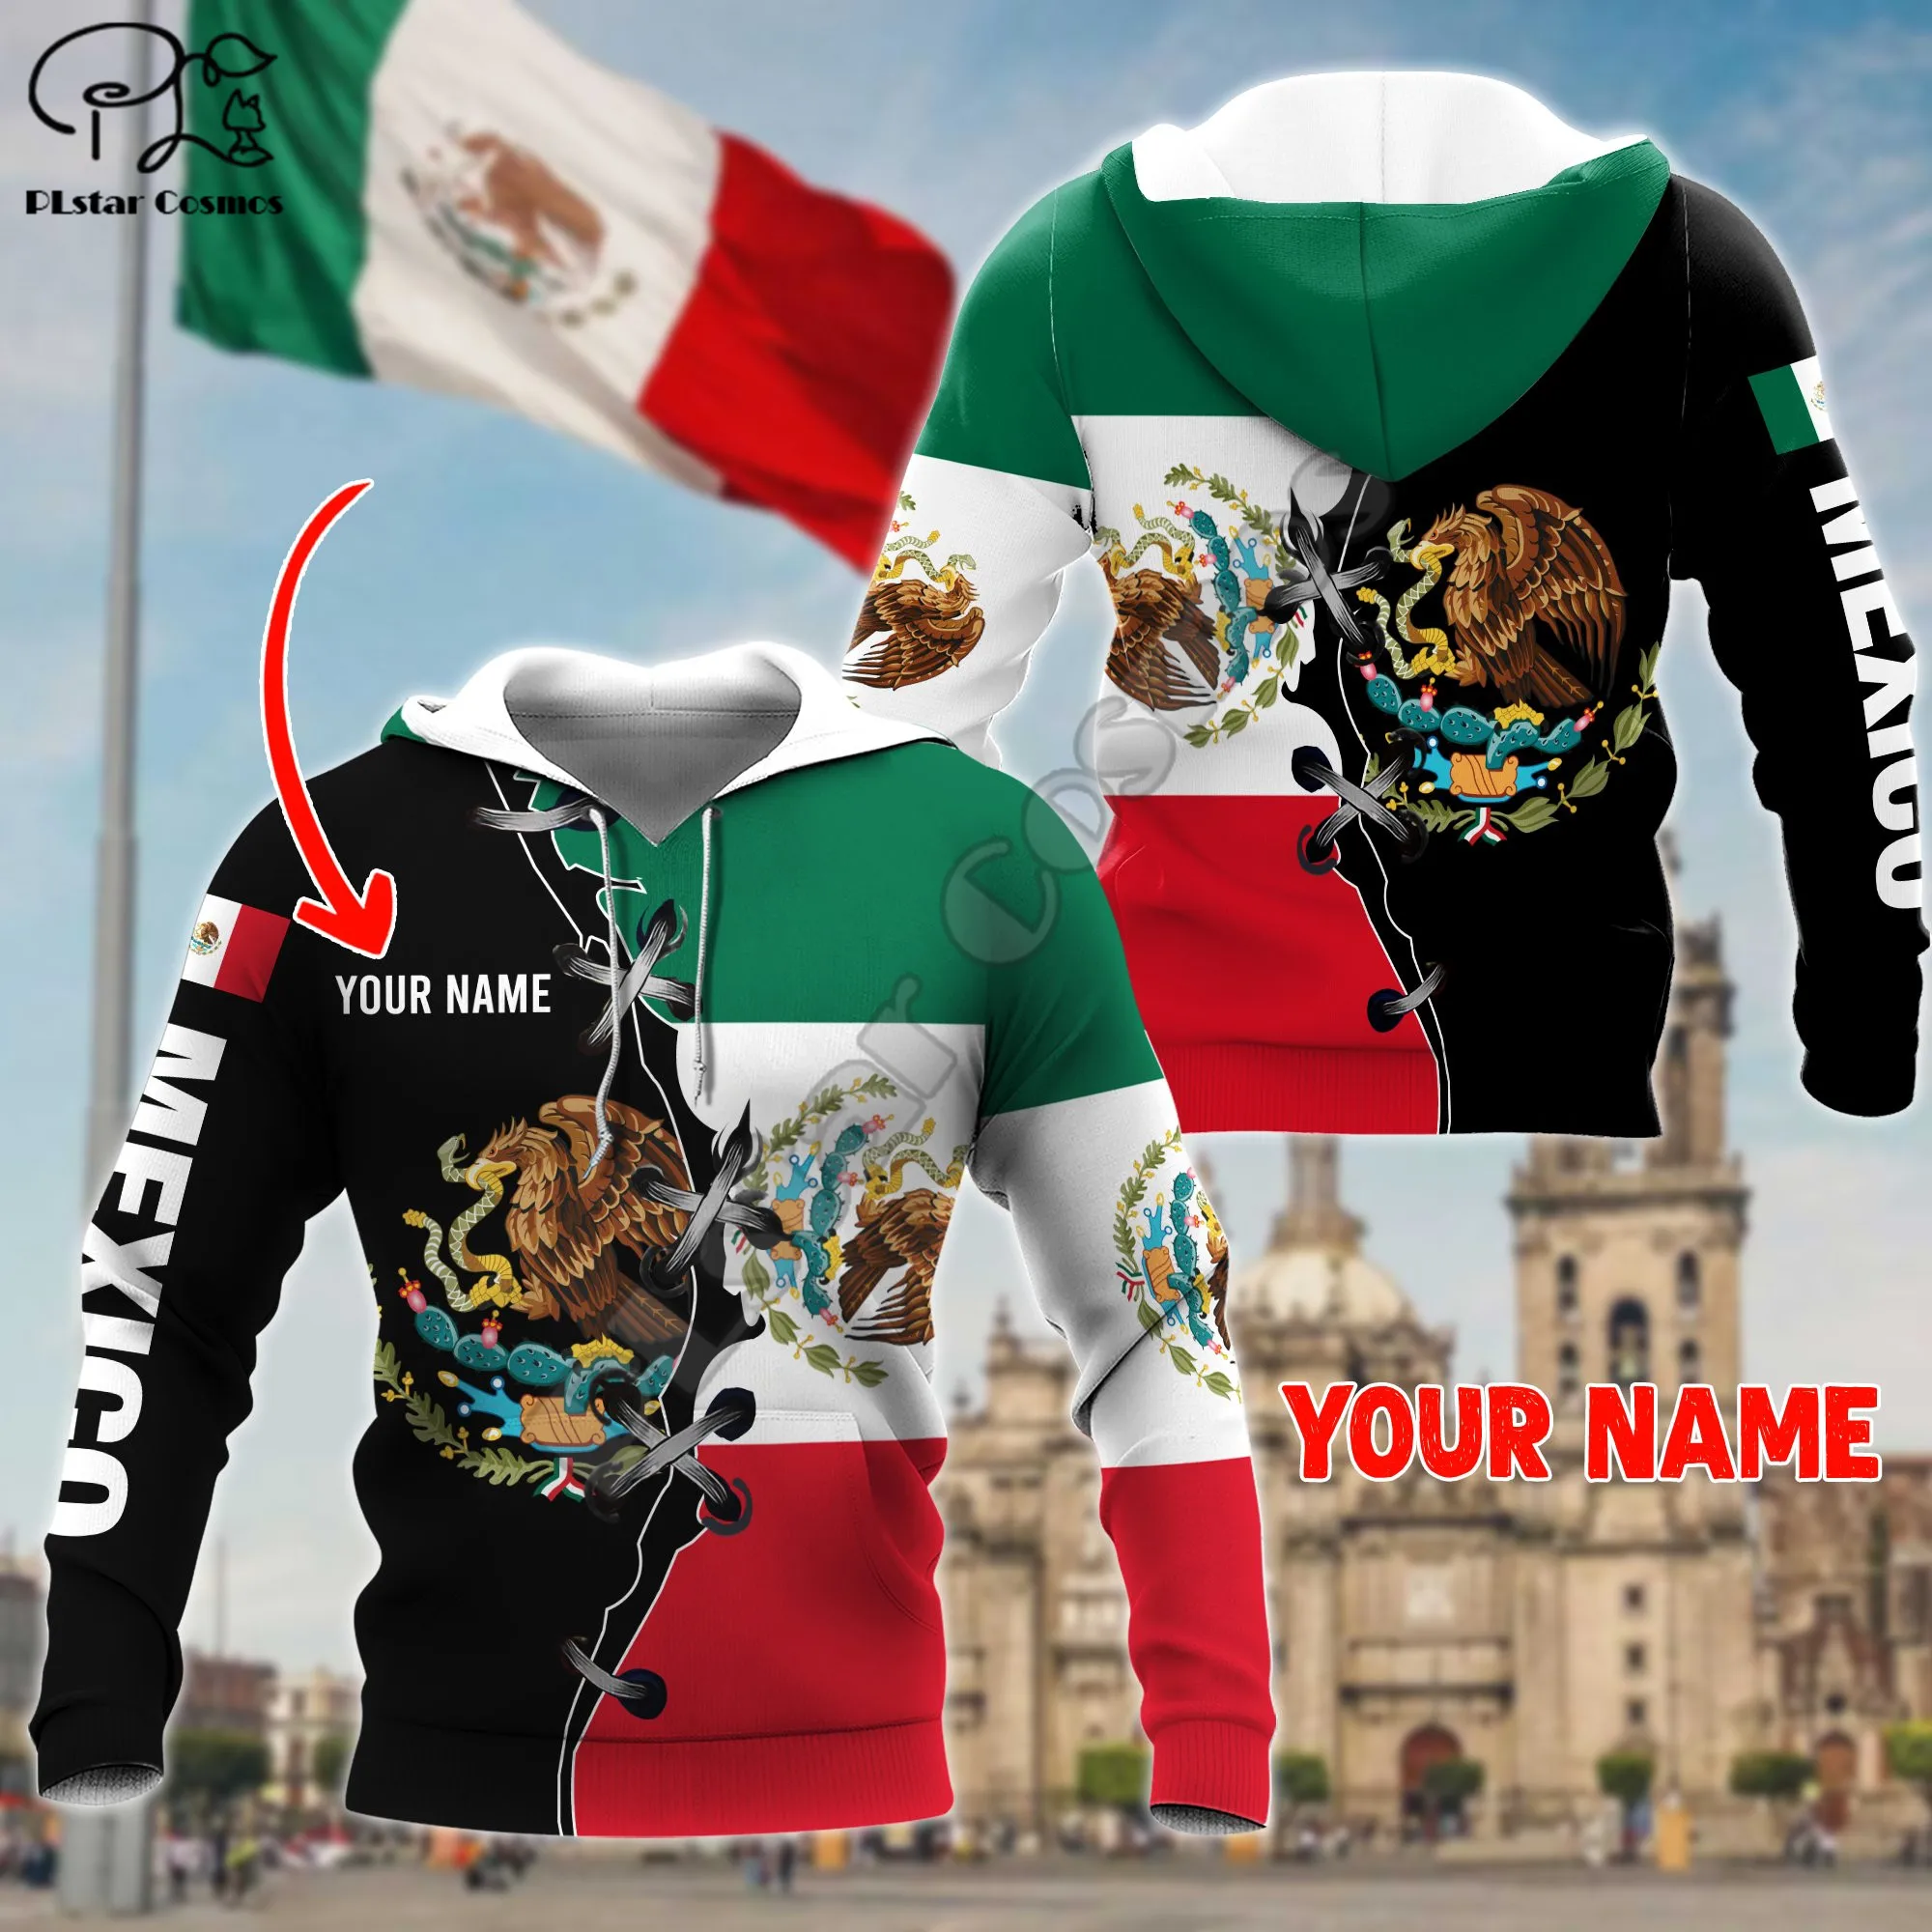 

PLstar Cosmos National Emblem Mexico Flag 3D Printed Hoodies Sweatshirts Zip Hooded For Men And Women Casual Streetwear Style-18